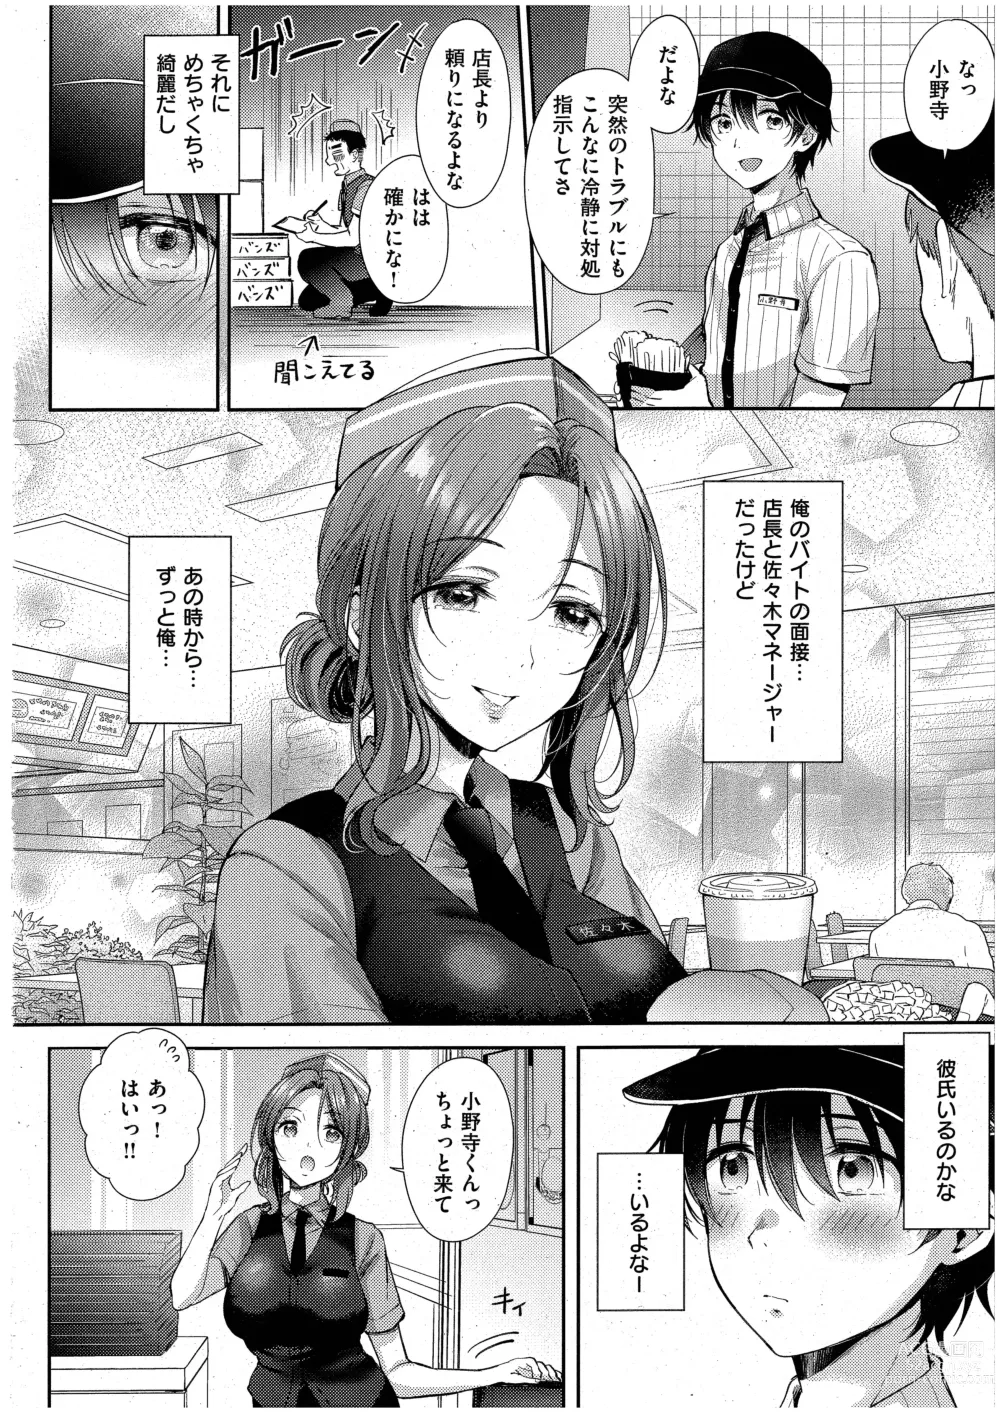 Page 4 of manga Eat in Take Out Zenpen